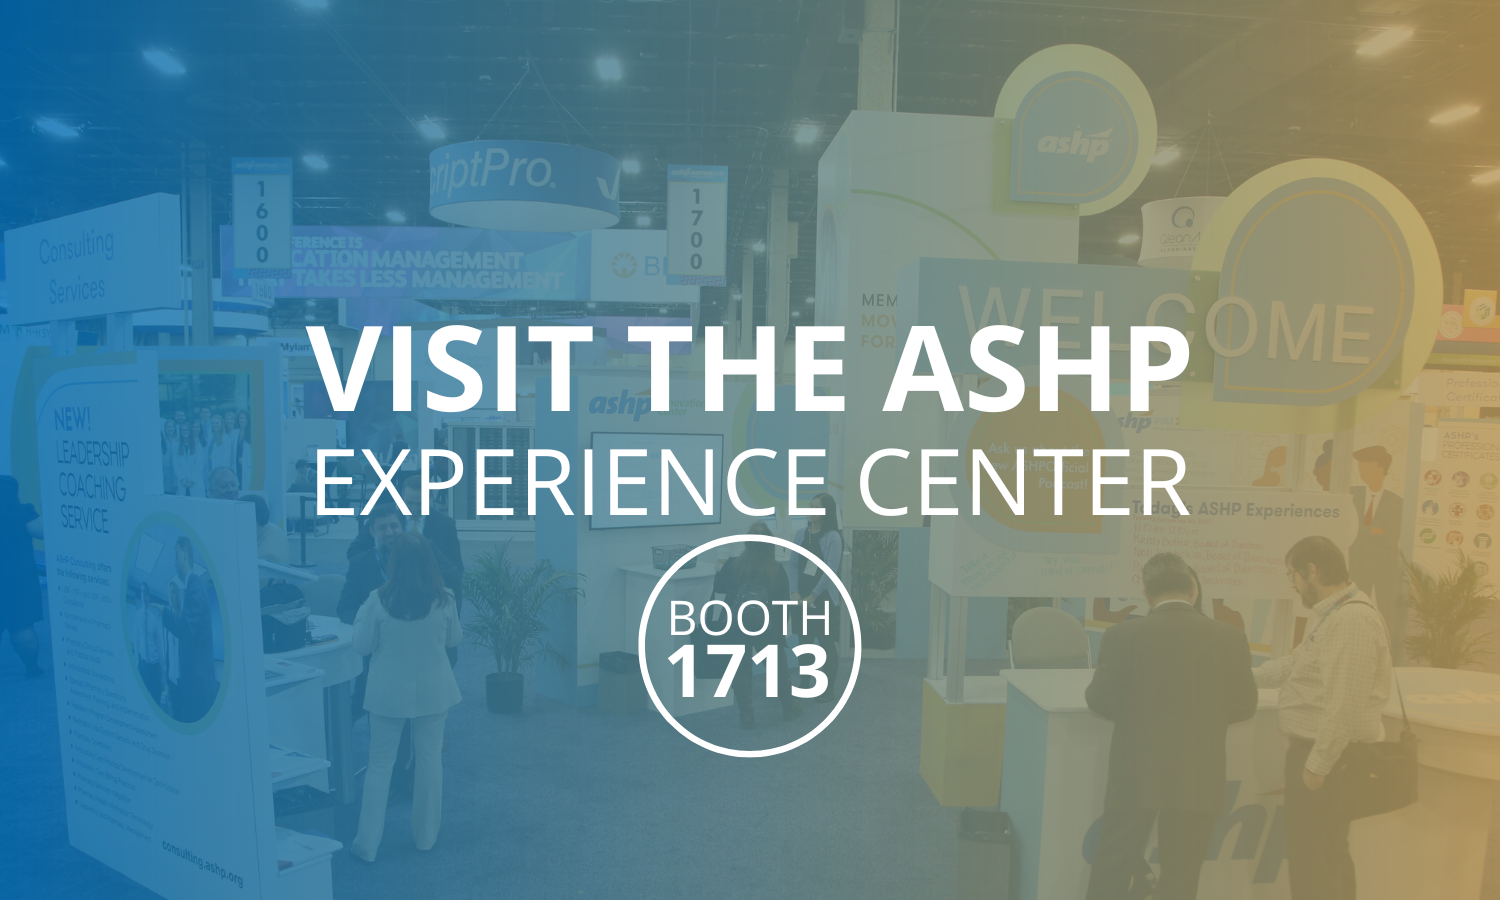 visit the ashp experience center - booth 1713